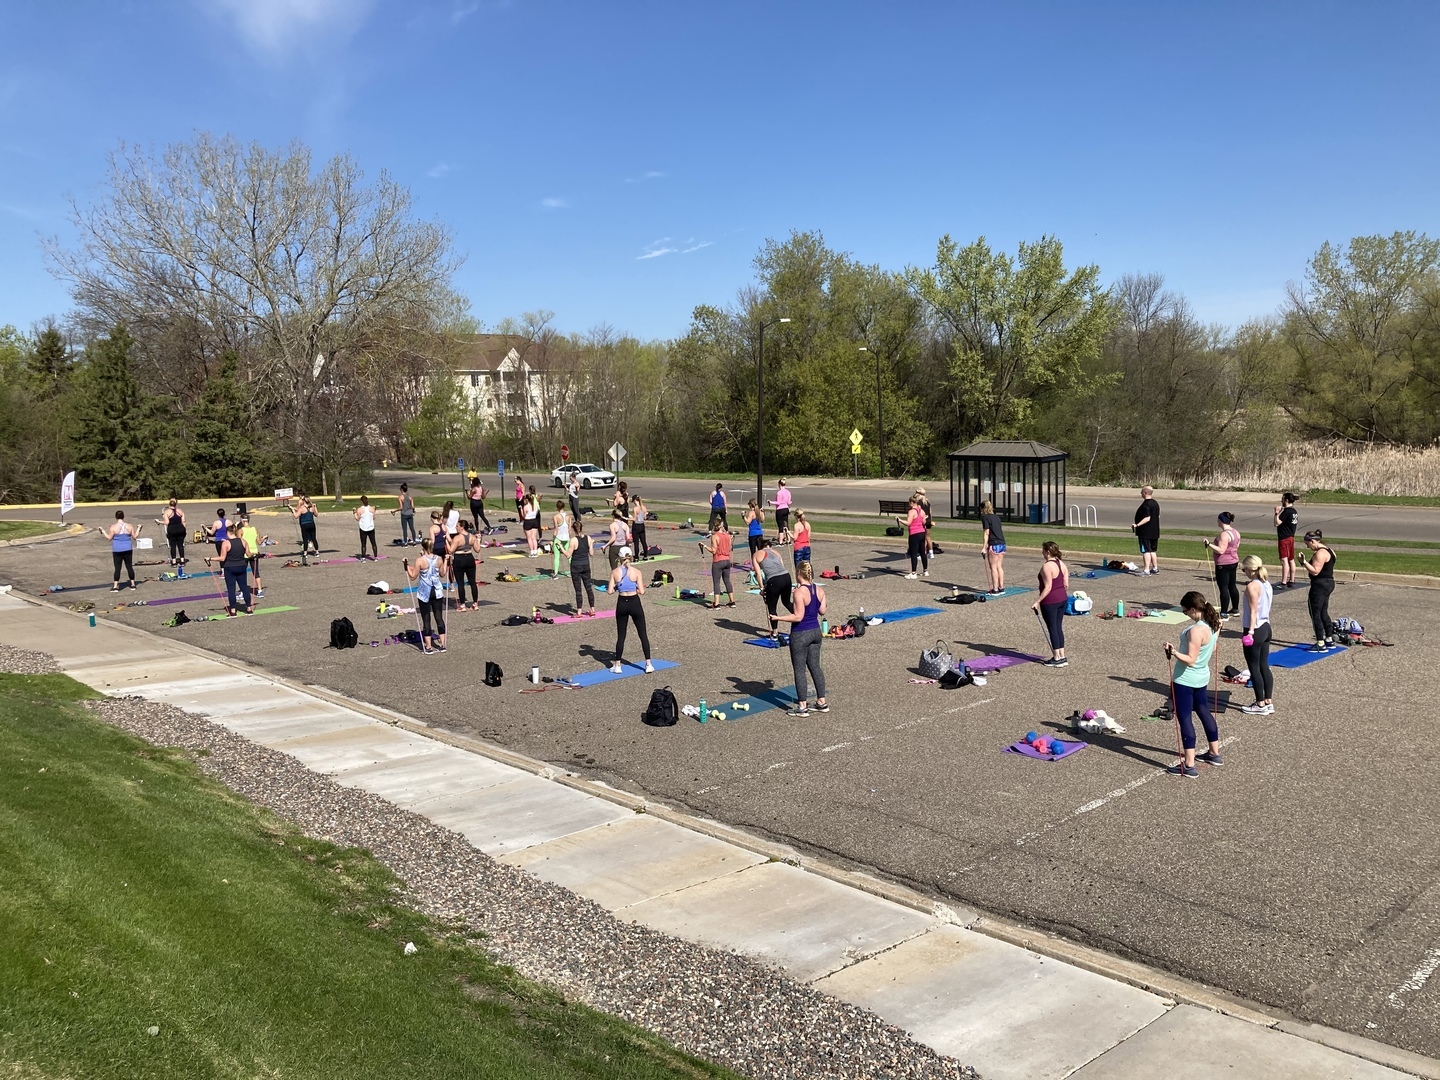 Free Outdoor Workout with Movement Studio, Hennepin, Minnesota, United States